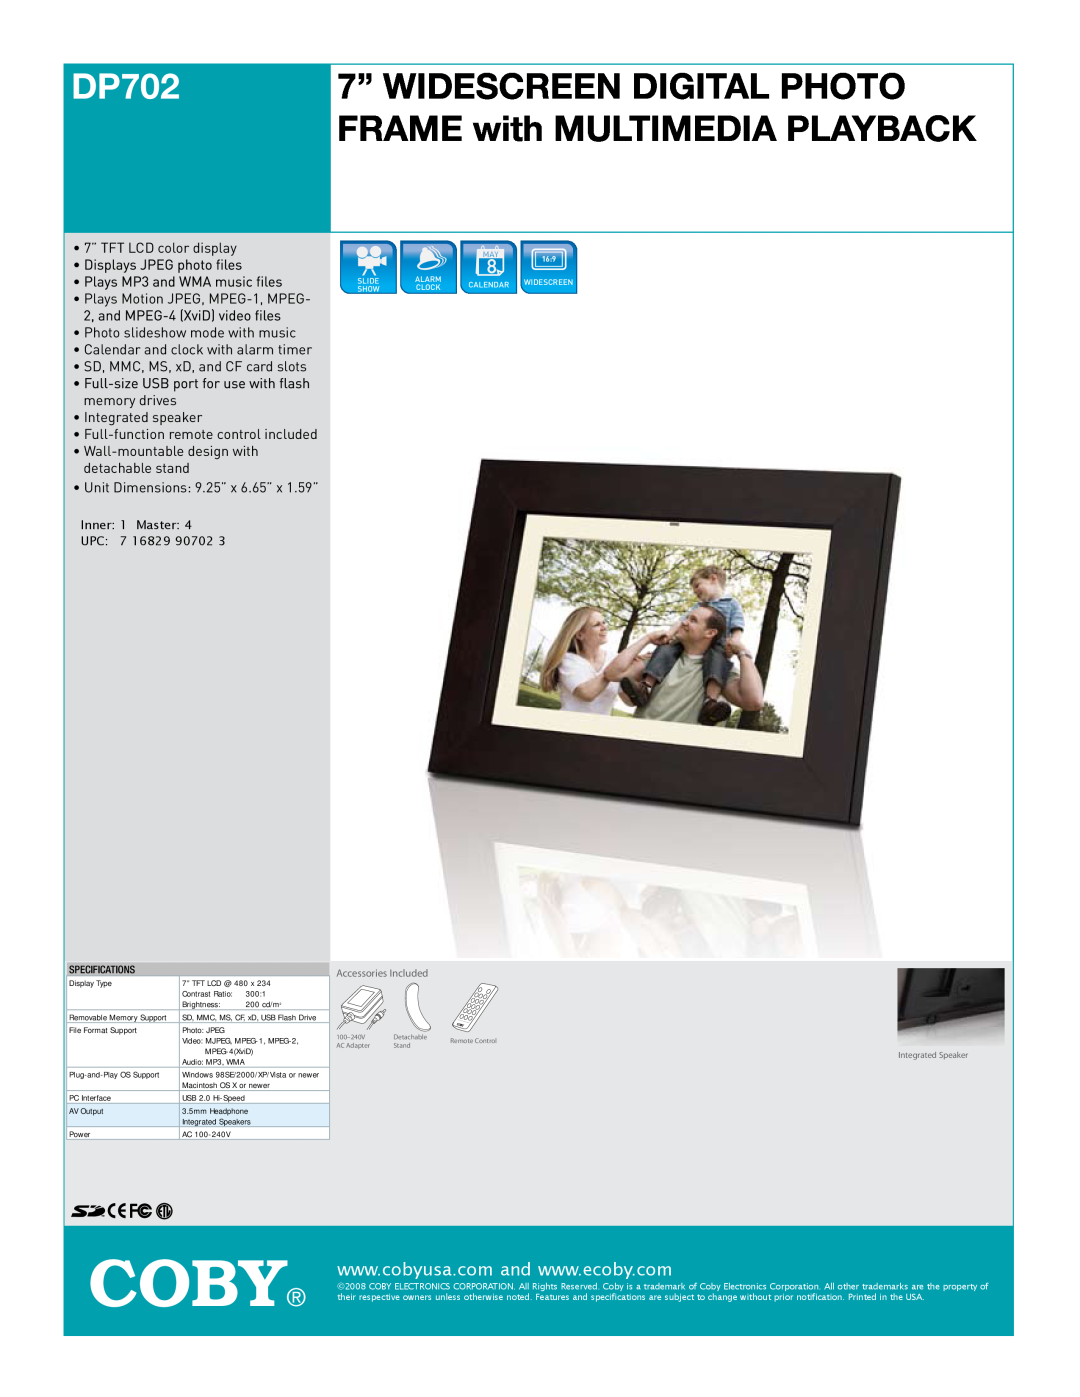 COBY electronic DP702 specifications Coby, 7” WIDESCREEN DIGITAL PHOTO FRAME with MULTIMEDIA PLAYBACK, Specifications 